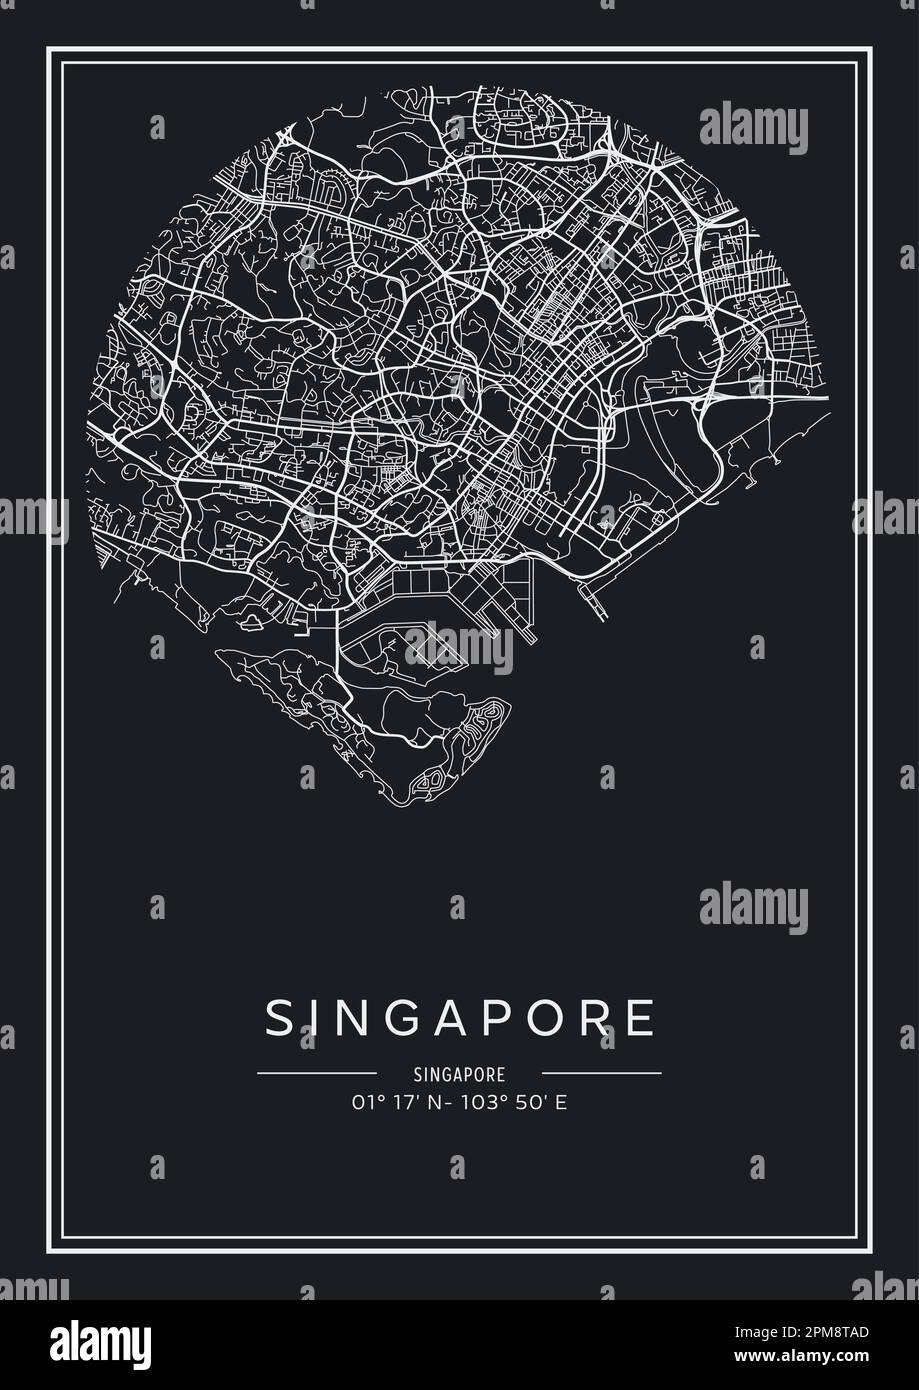 Black and white printable Singapore city map, poster design, vector illistration. Stock Vector